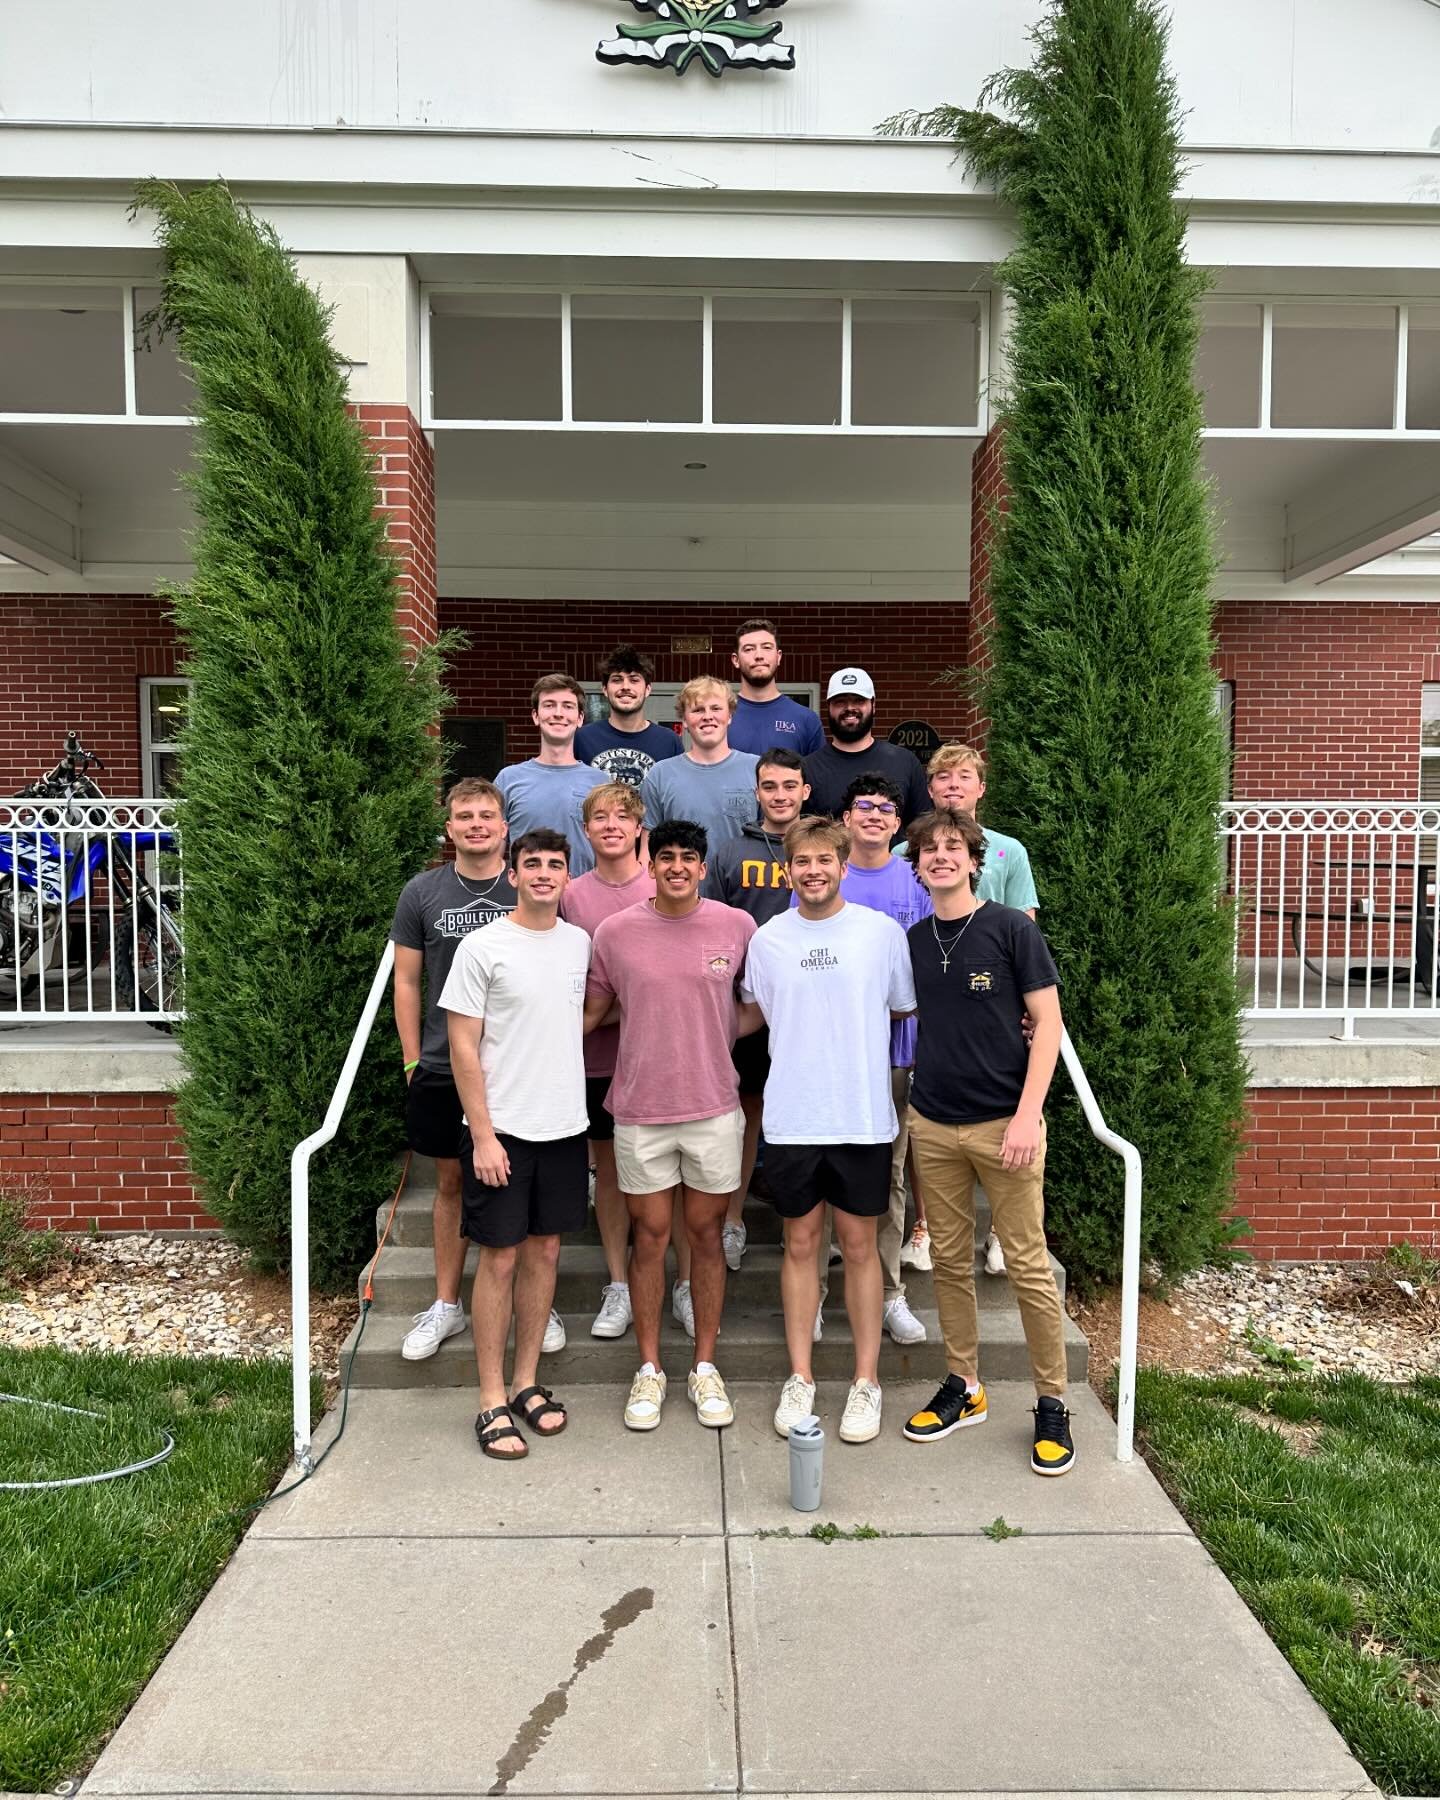 This past week Alpha Omega saw 19 young men join our Alumni ranks. Their dedication, leadership, and camaraderie have left an incredible mark on our fraternity and at Kansas State. We wish these men the best of luck and success in their careers and f